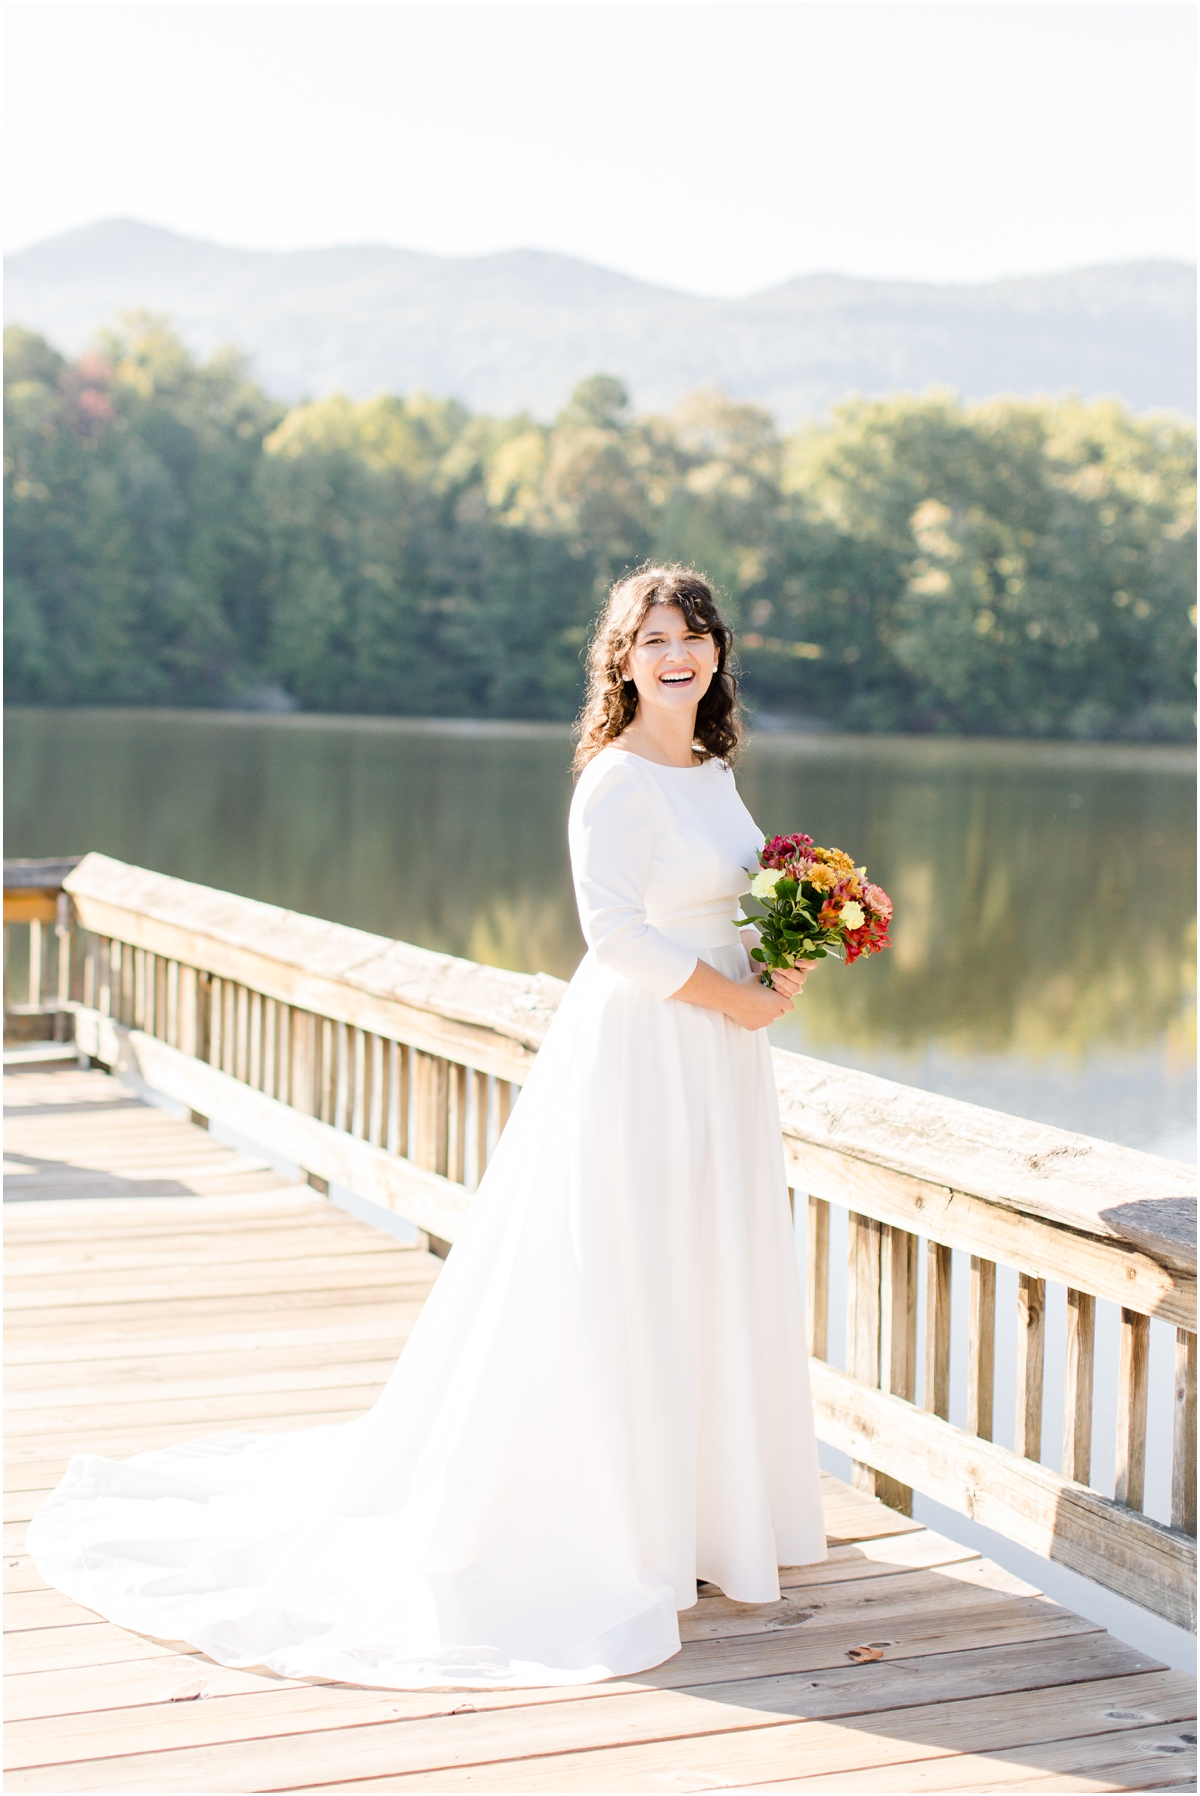 table rock bridal session in greenville, sc